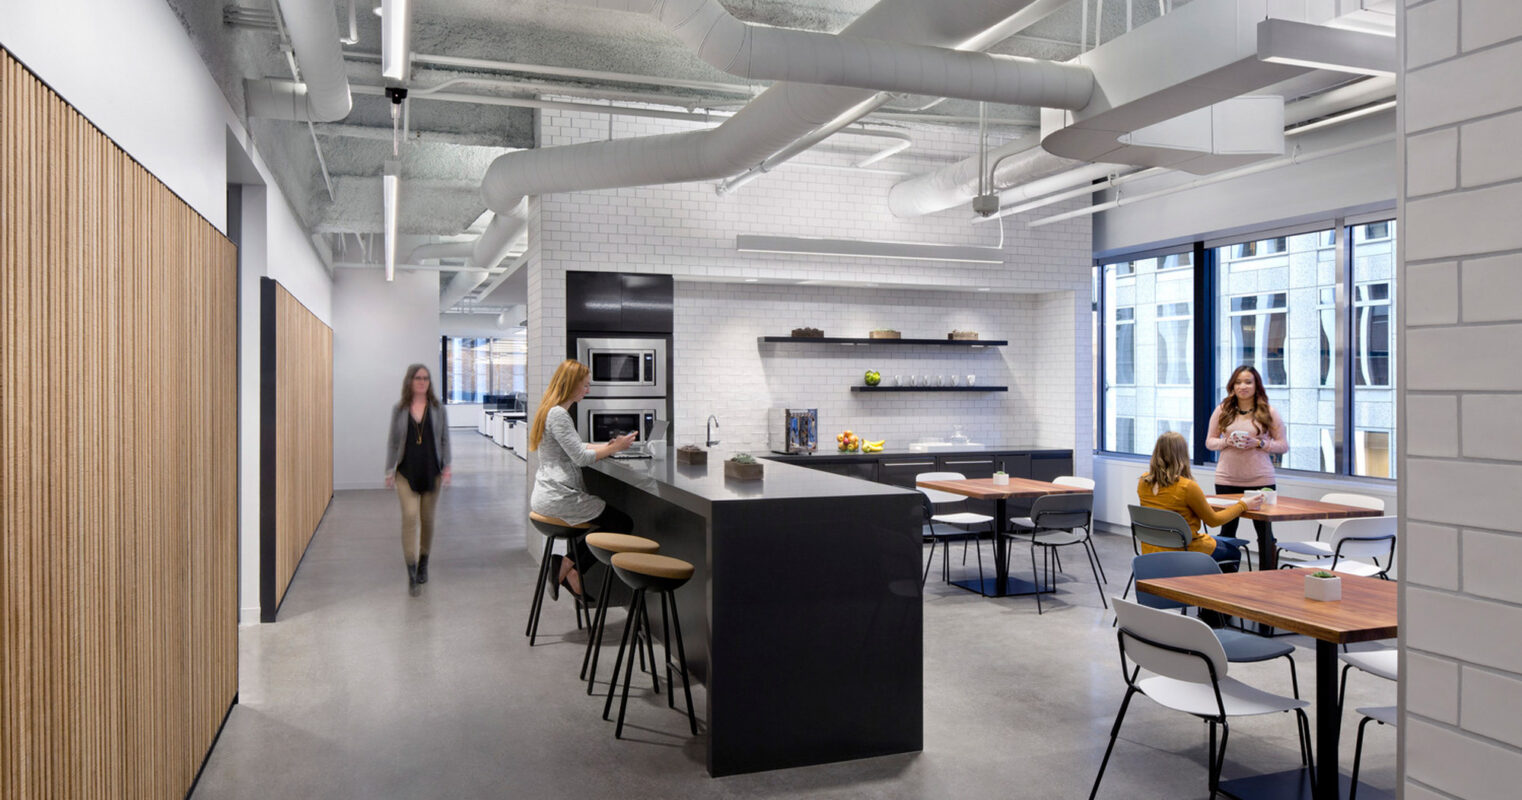 Modern office break room featuring an open-plan layout with polished concrete floors, wooden accents, and a central kitchen island. Exposed ceiling pipes and ductwork contribute to an industrial aesthetic, complemented by natural light from large windows. Employees casually interact in the multifunctional, contemporary workspace.